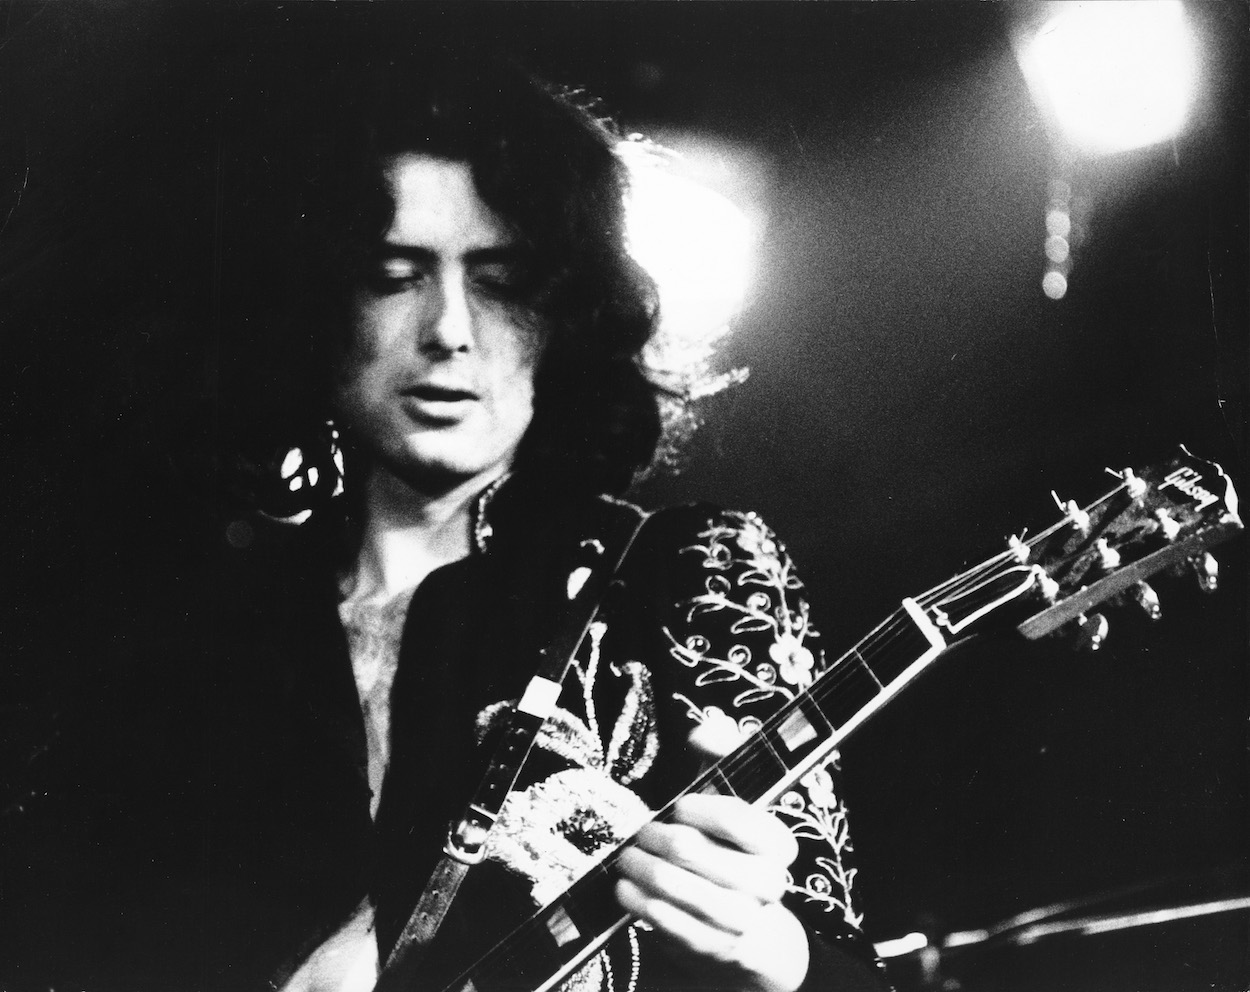 Jimmy Page Explained His Led Zeppelin Recording Approach in Just 14 Words, and You Can Hear it in Action on Zep’s Debut